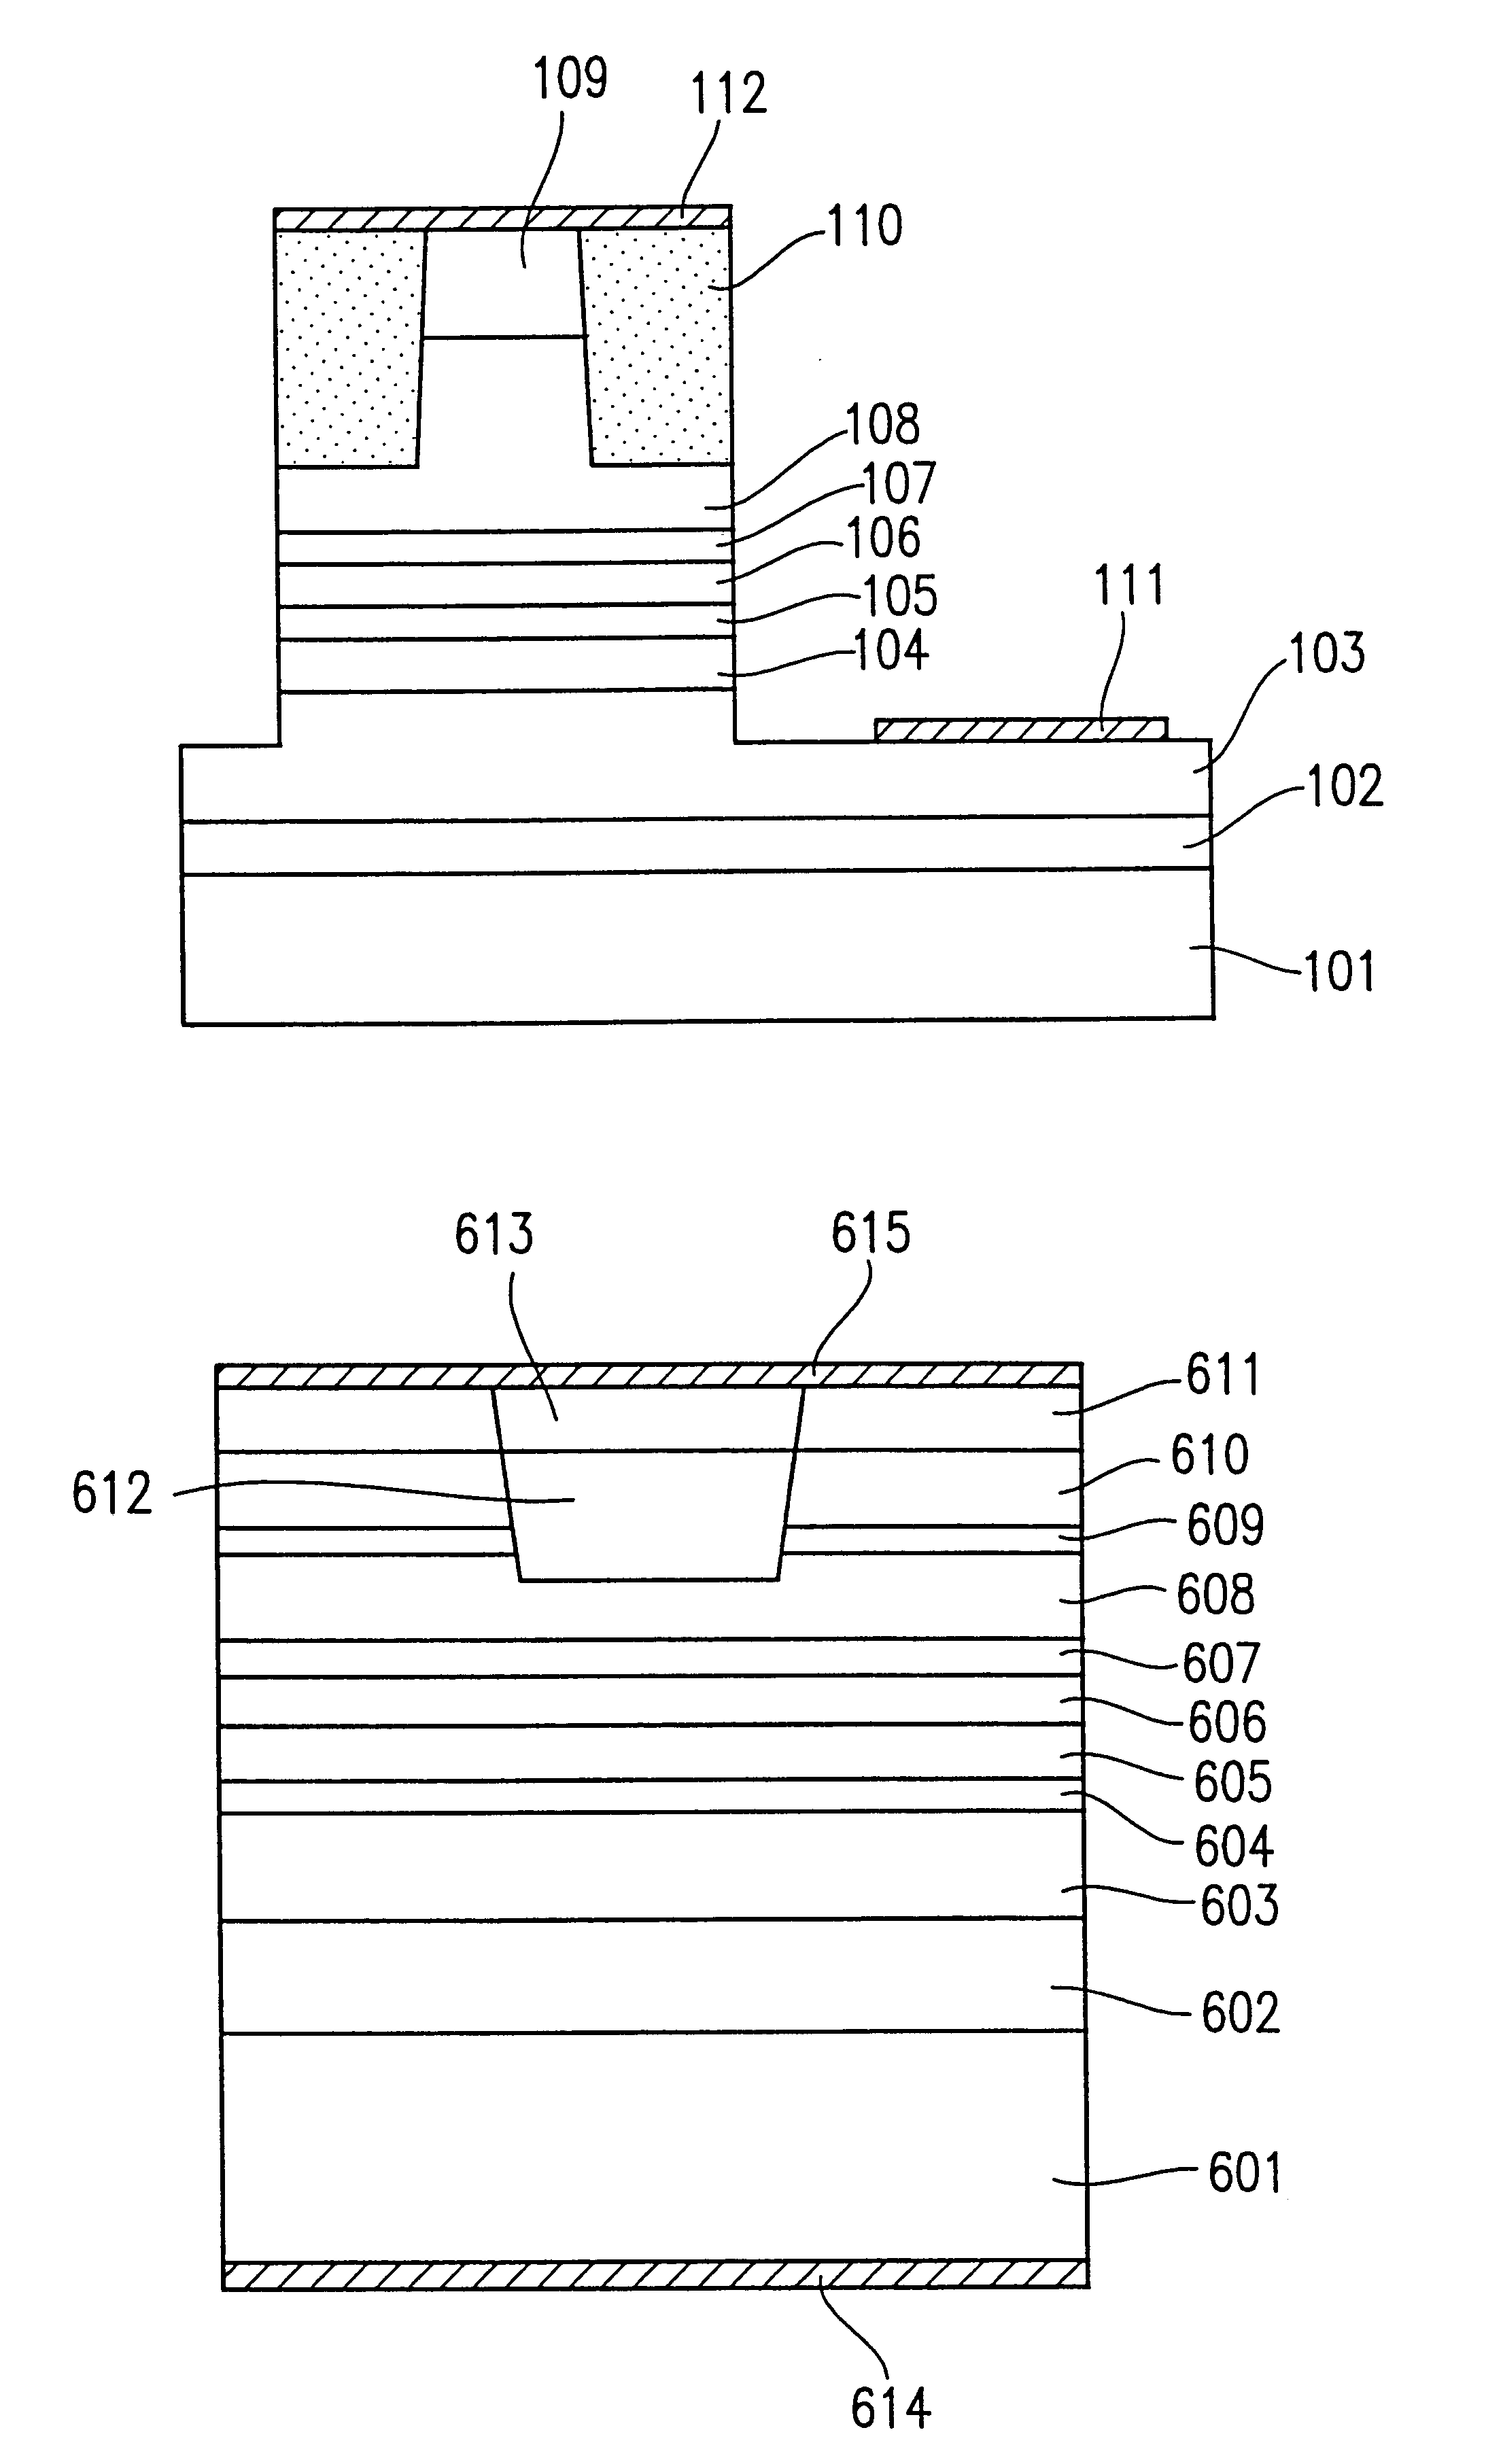 Compound semiconductor laser